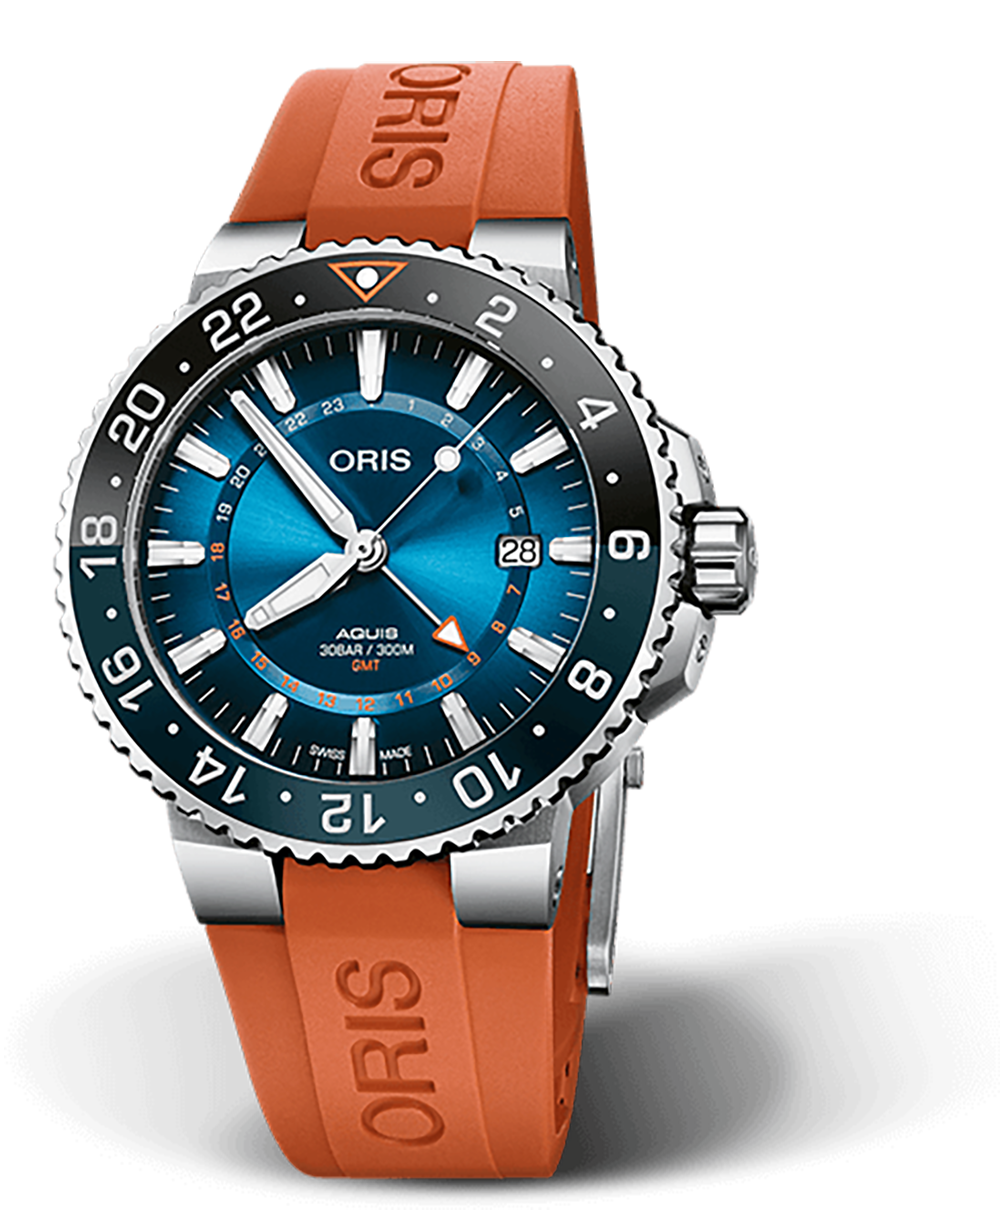 Aquis Carysfort Reef Limited Edition